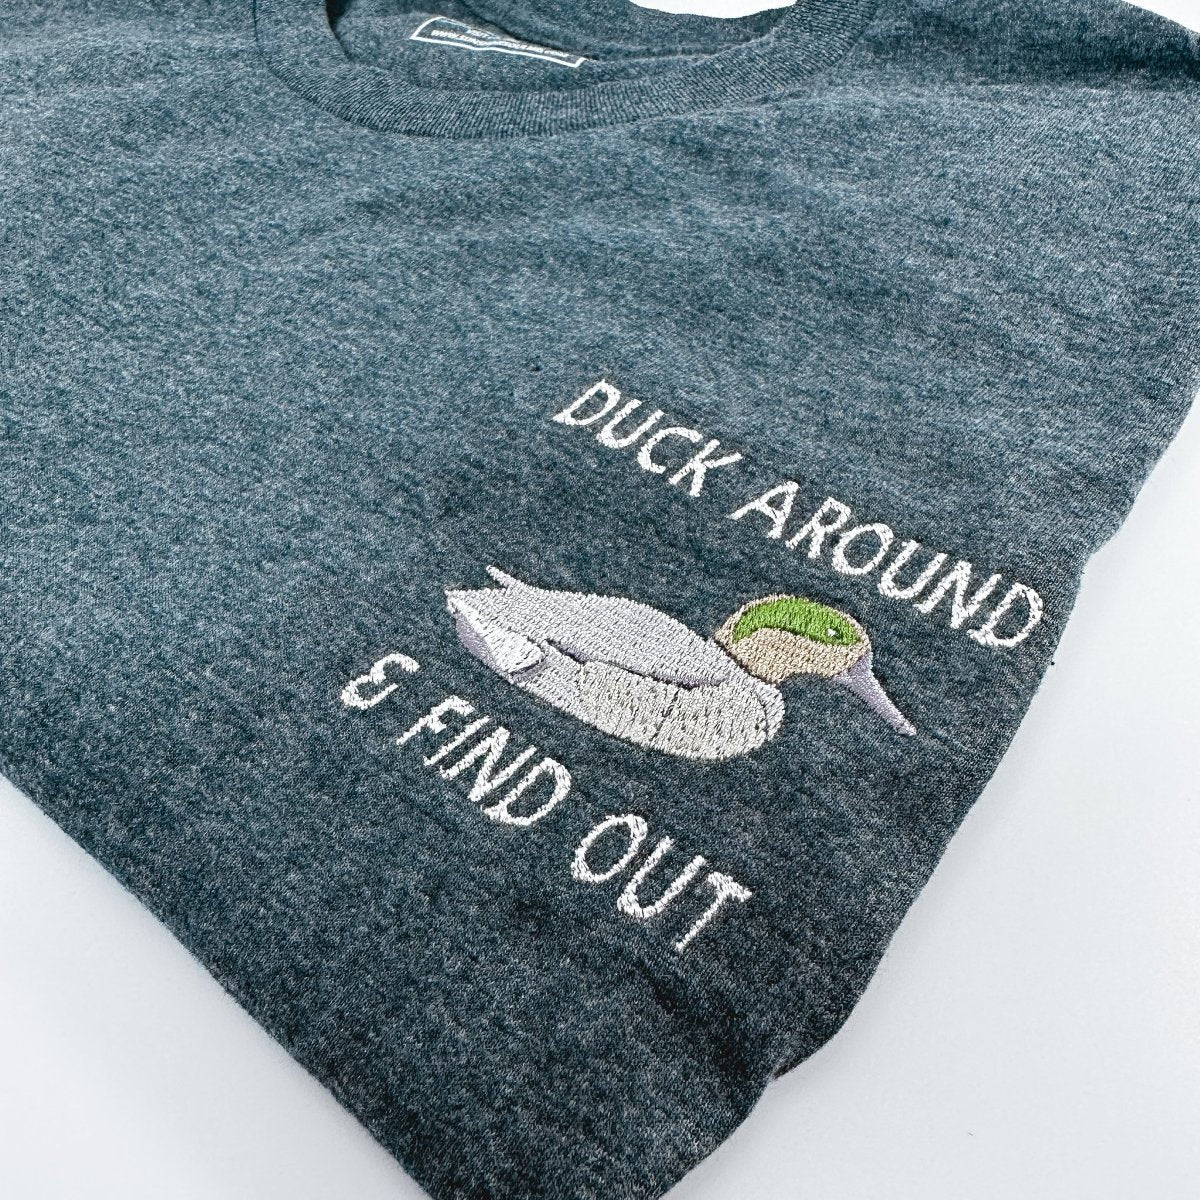 Duck Around & Find Out Embroidered Shirt - Sunshine Soul MD